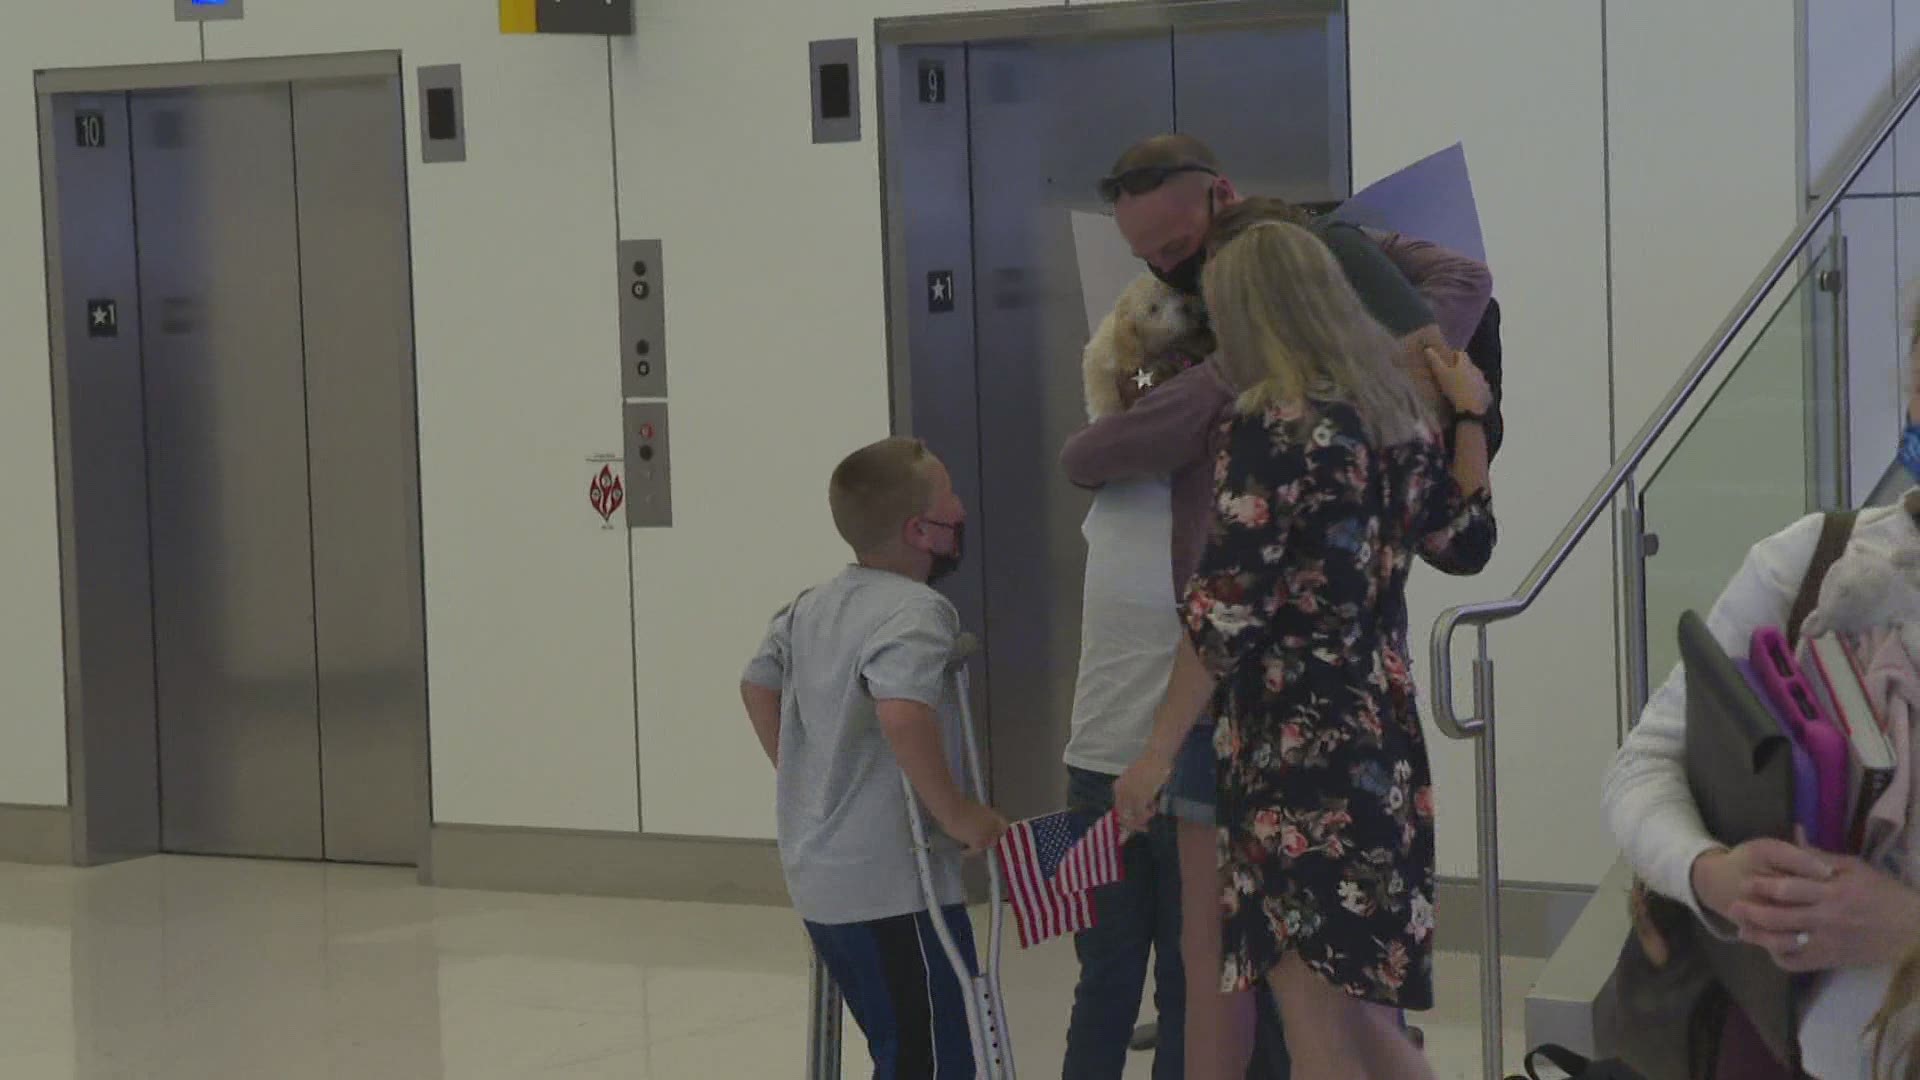 Family and friends gathered at the Portland Jetport to surprise Air Force Lieutenant Colonel Gregory Ward after a 13-month deployment in Kuwait